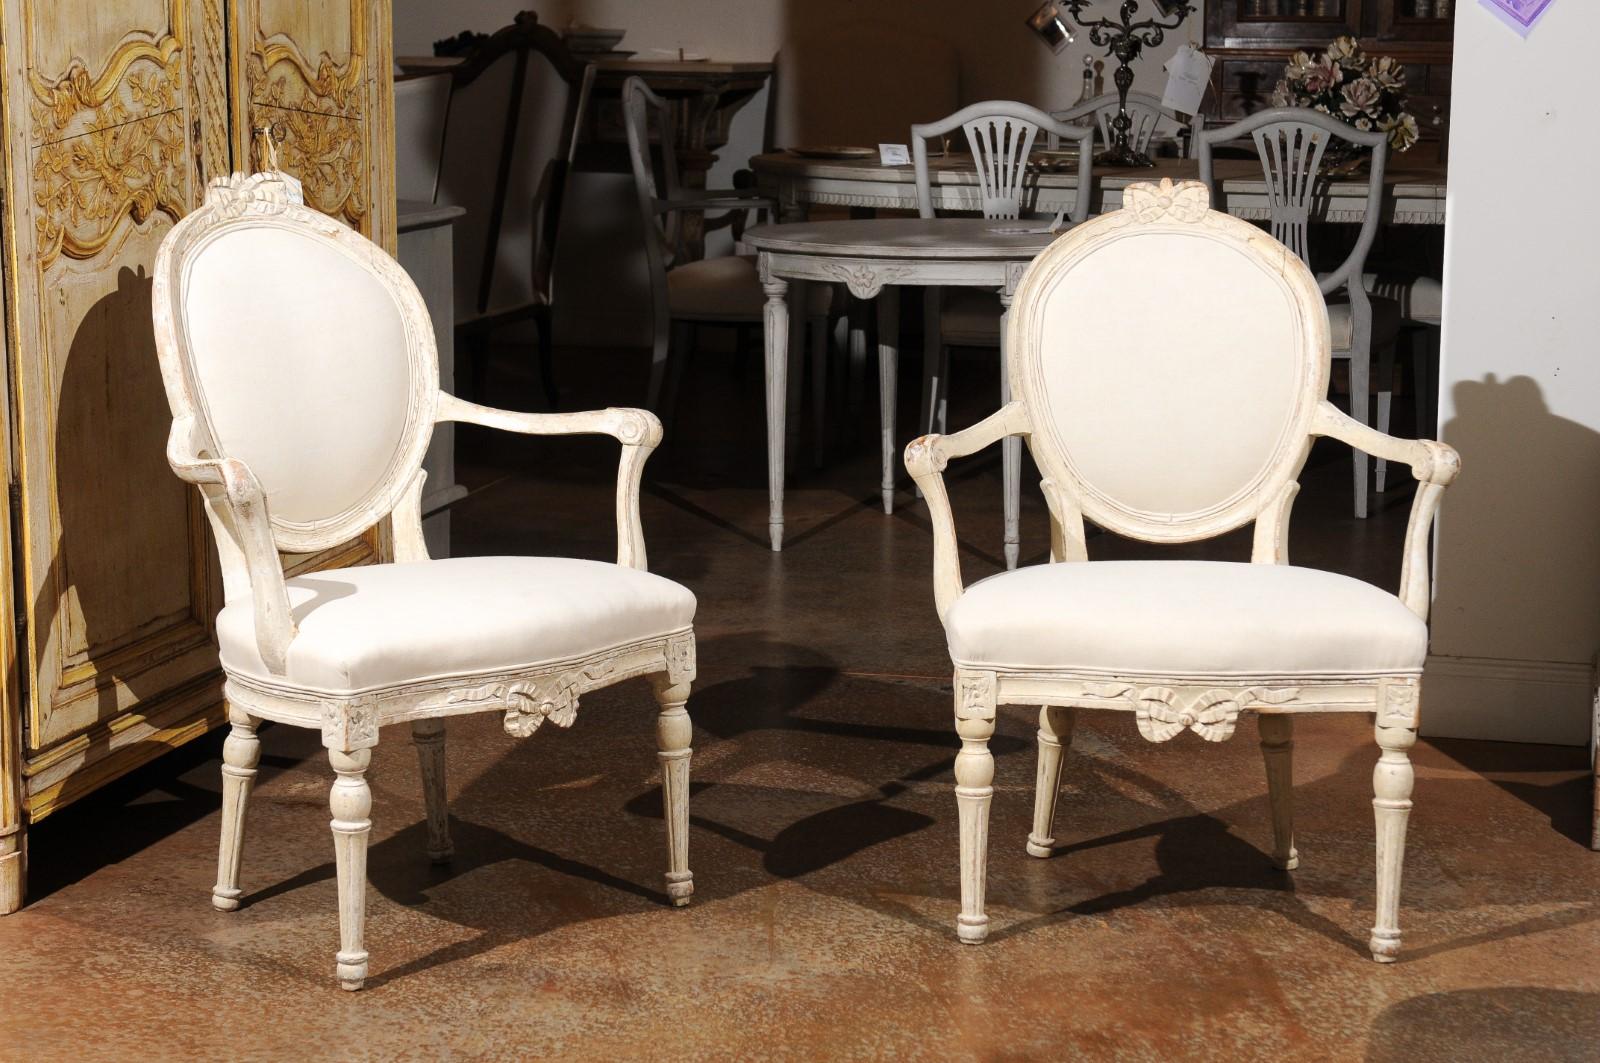 A pair of Danish 18th century Louis XVI painted wood oval back armchairs with bow motifs, scrolled arms and new upholstery. Born in Denmark during the 18th century, each of this pair of wooden armchairs features an oval back accented with a